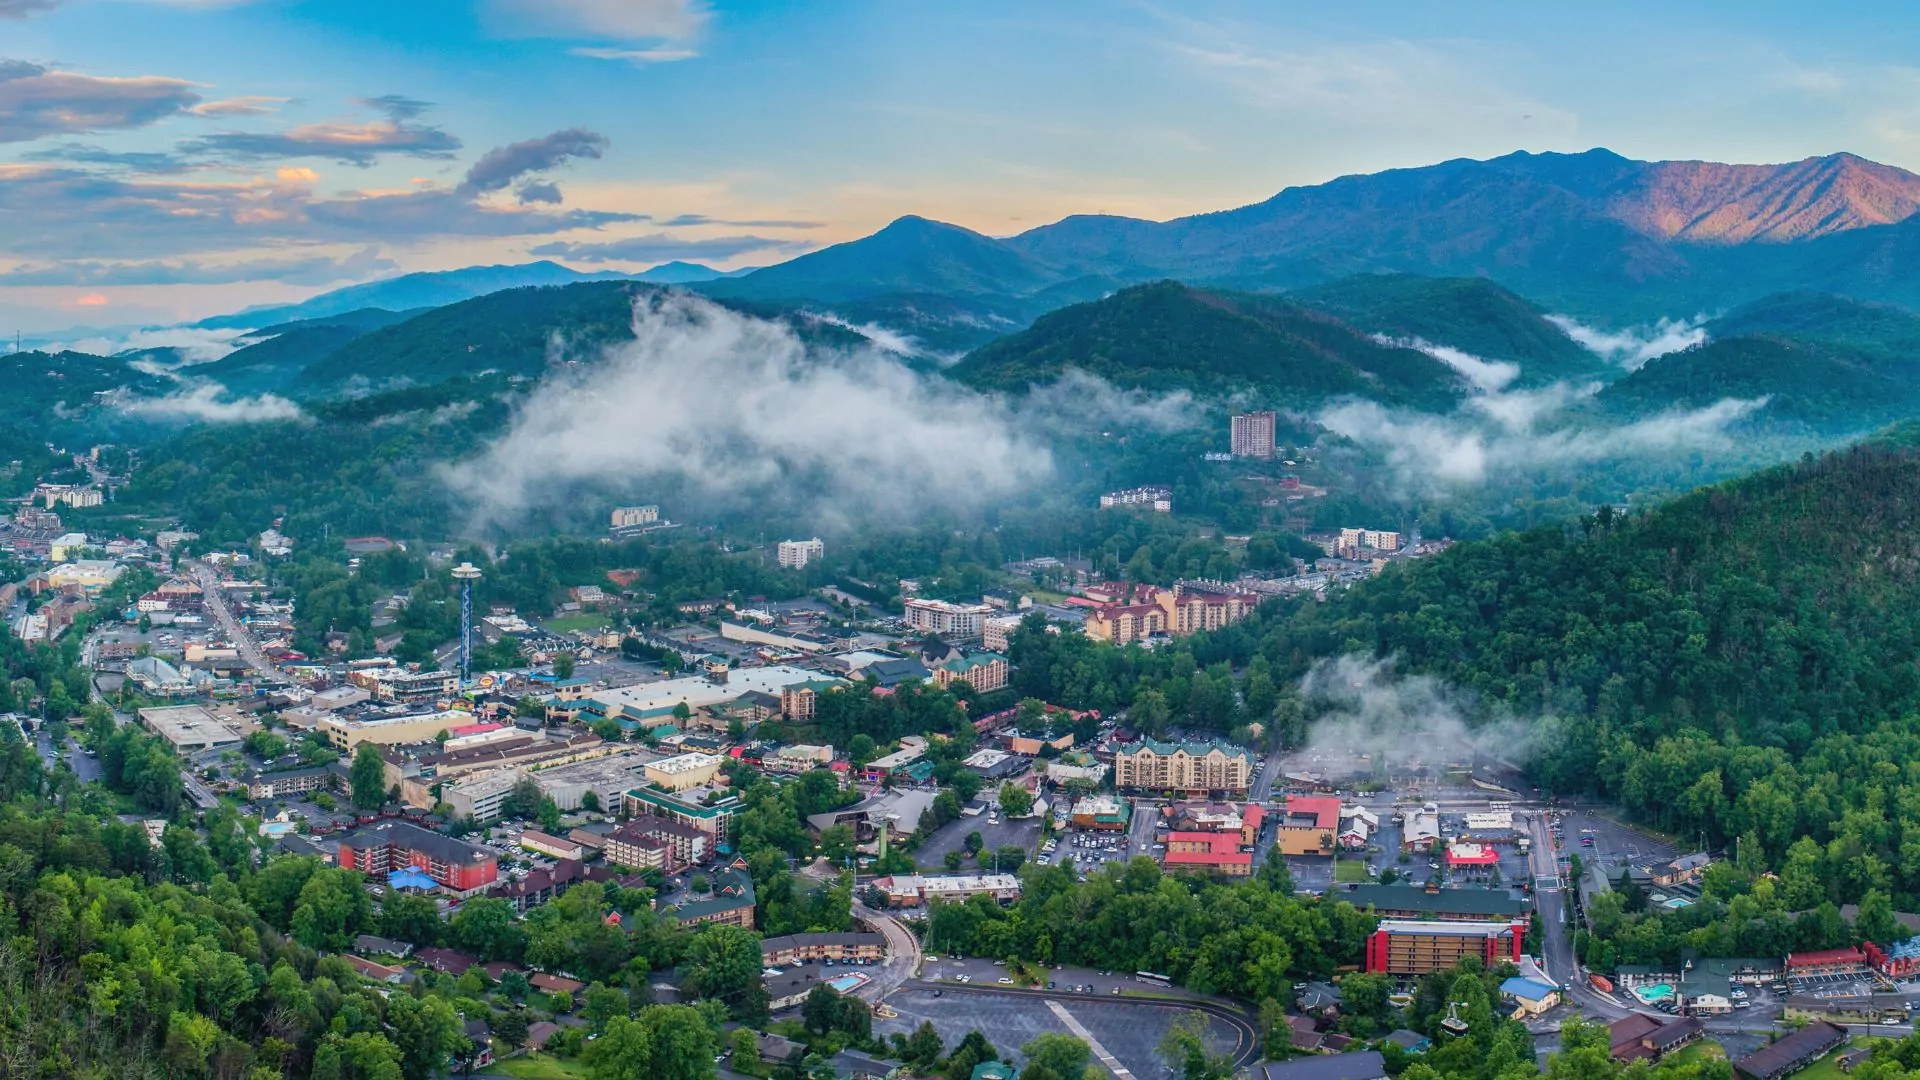 The town of Gatlinburg, Tennessee sits at the foot of the smoky mountains under a haze of clouds